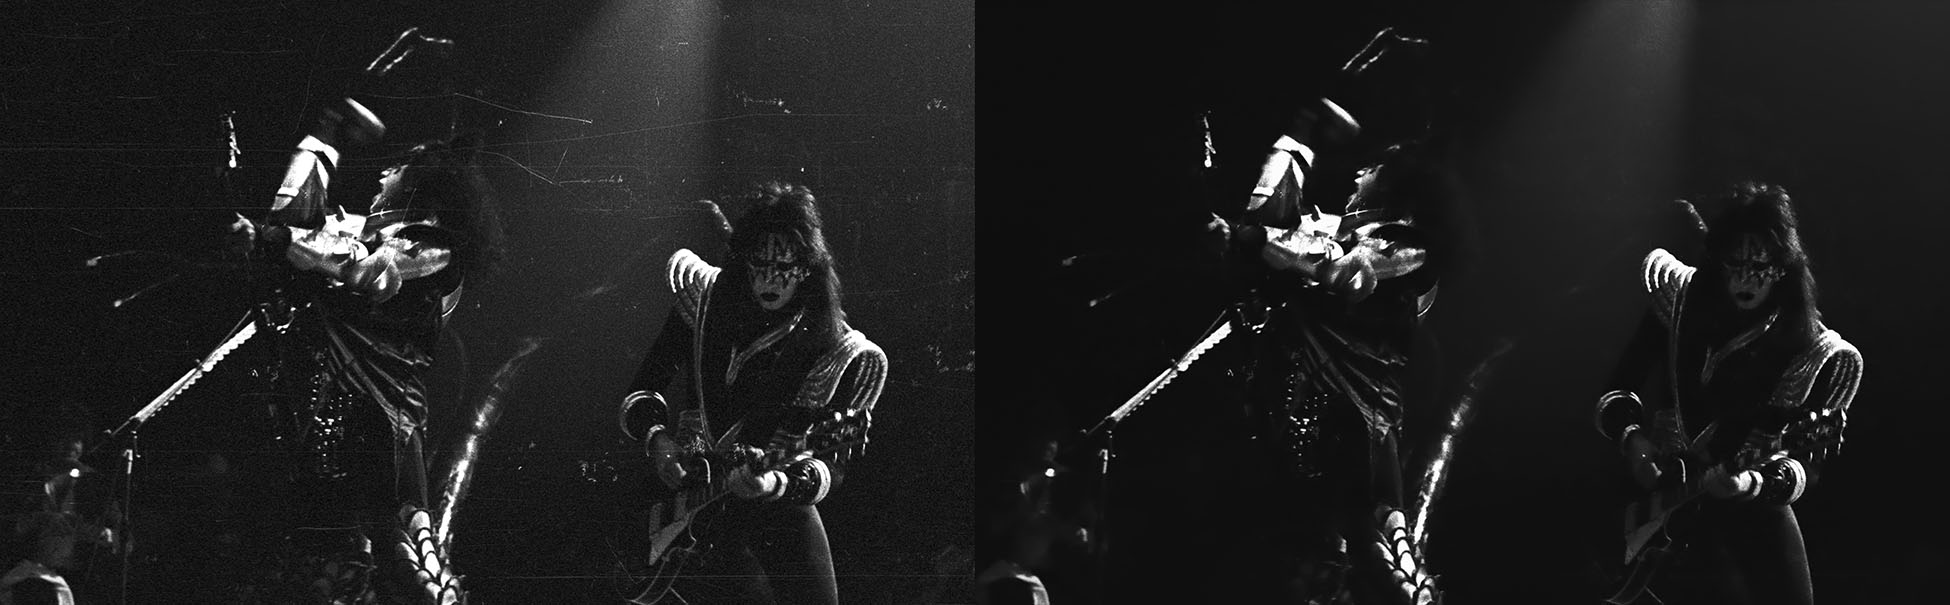 Kiss at Madison Square Garden February 18, 1977